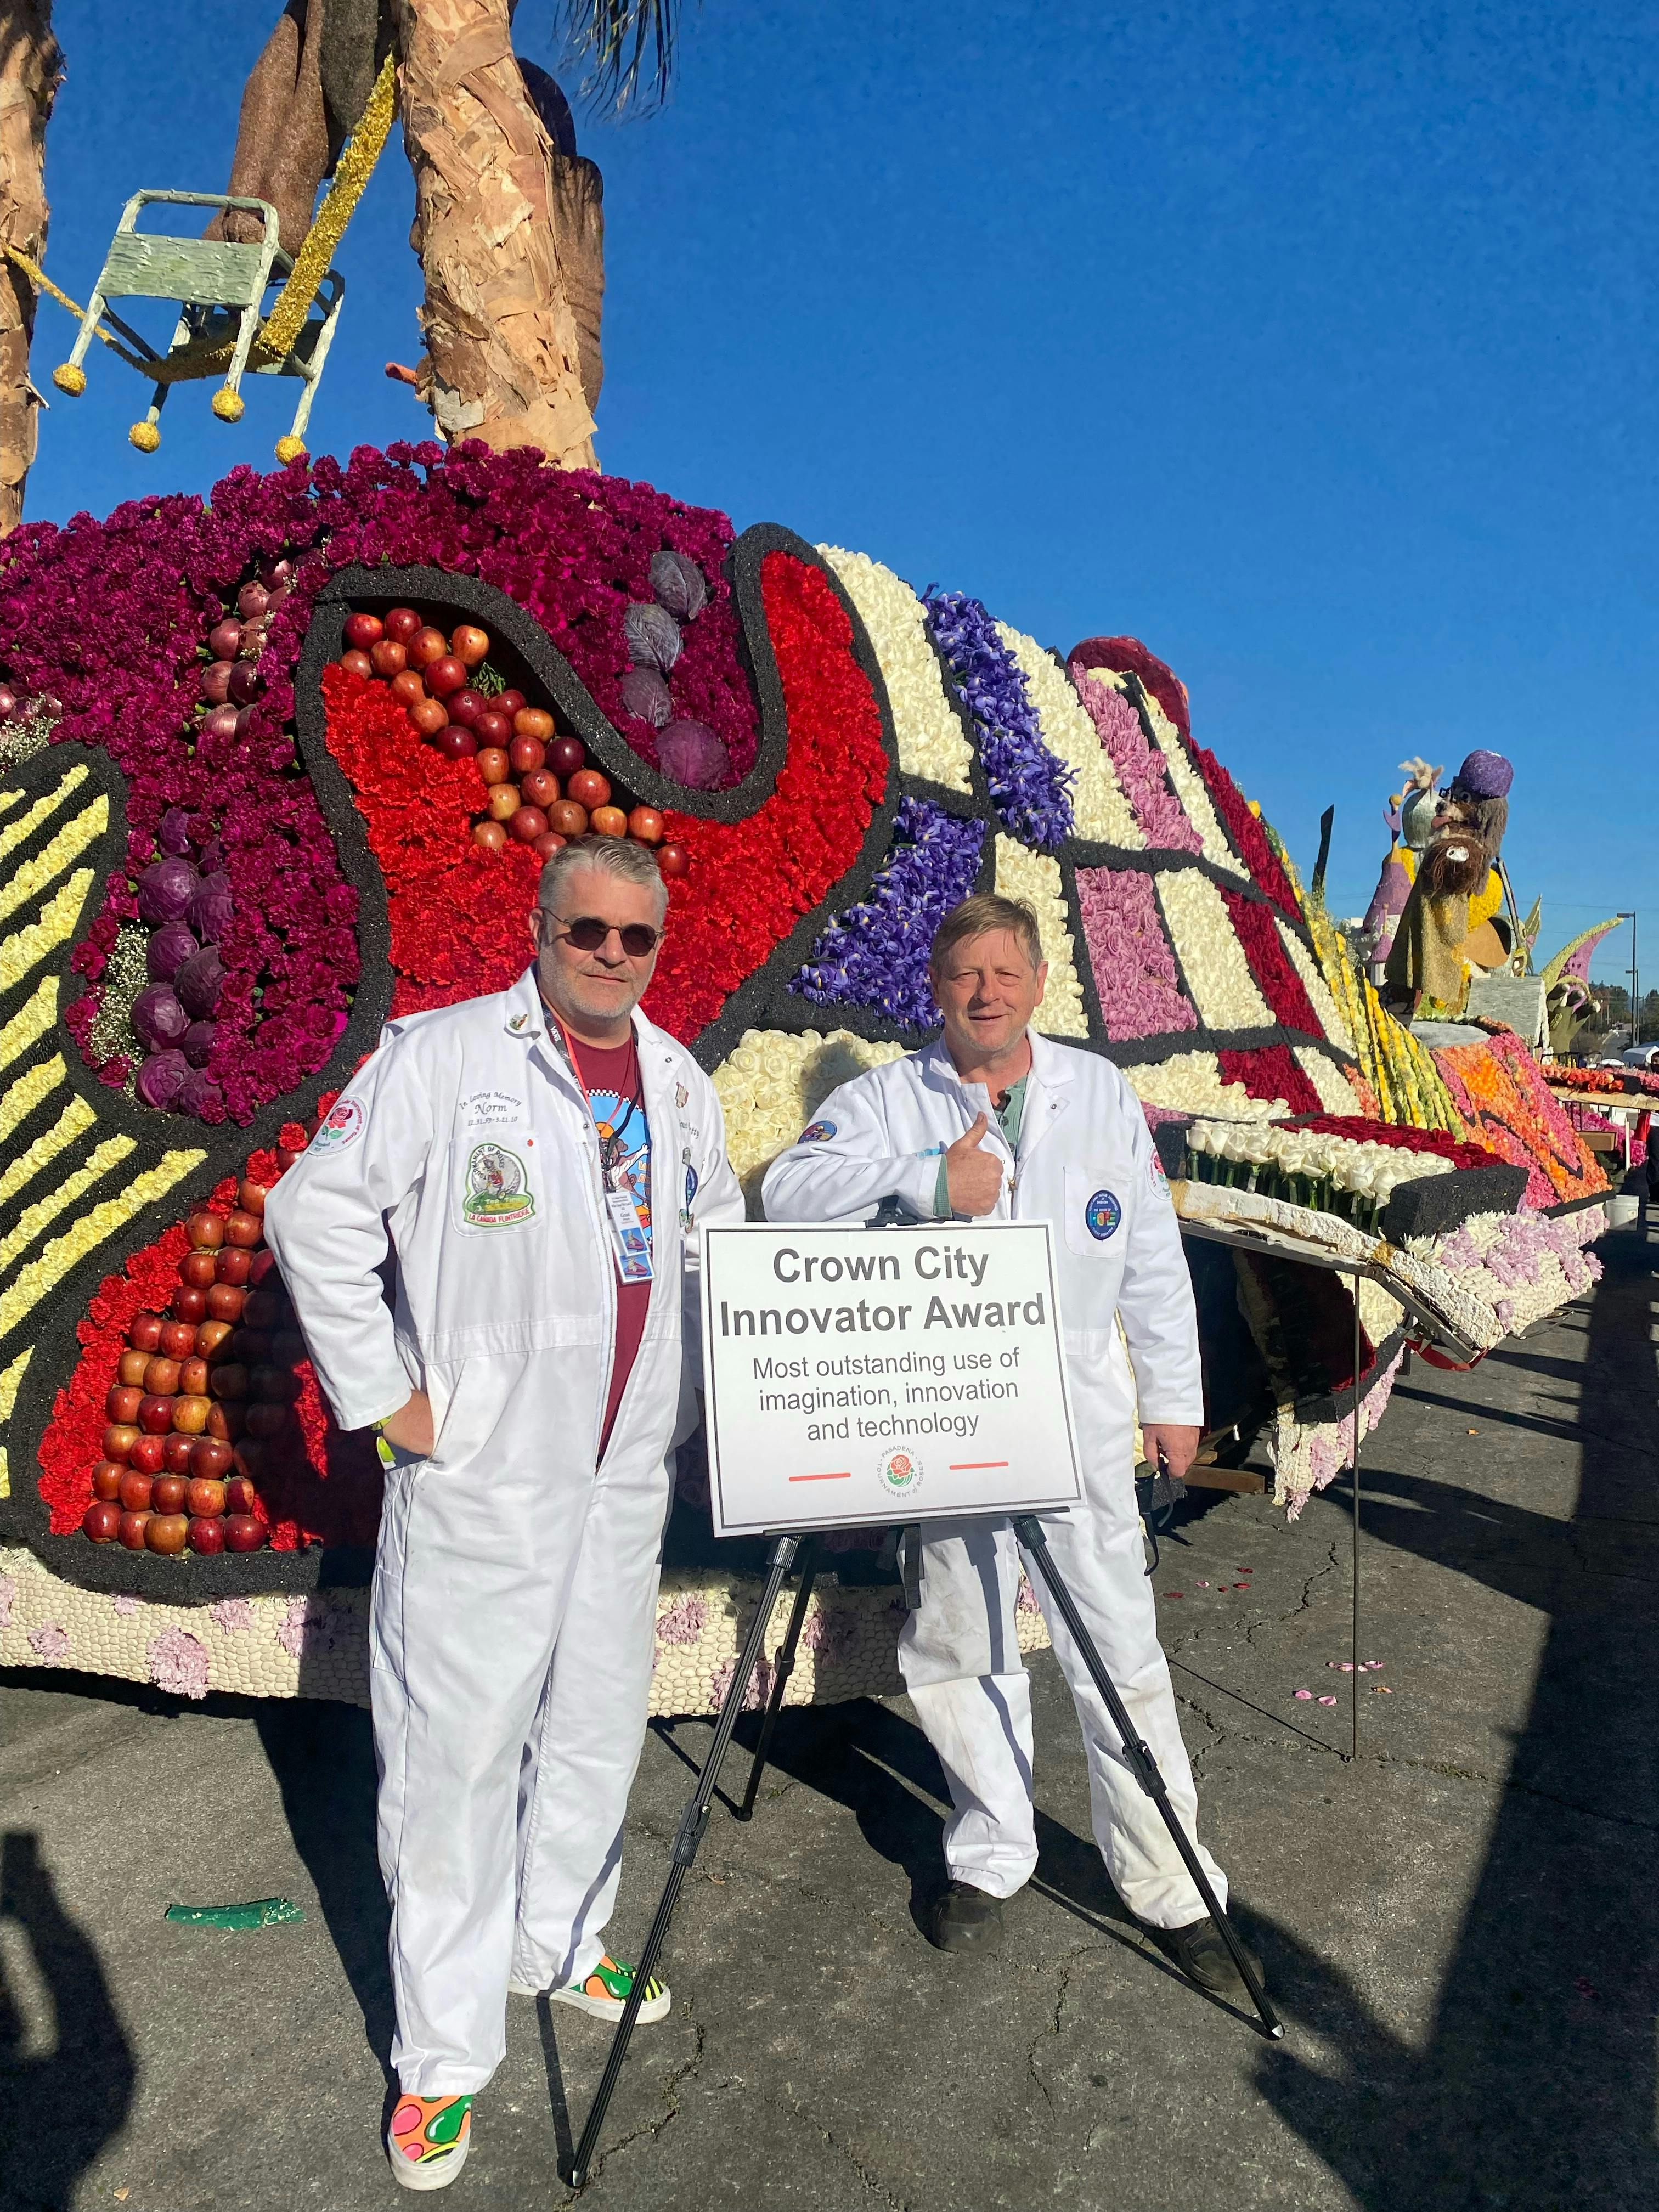 Two men post in front of parade float with Crown City Innovator Award